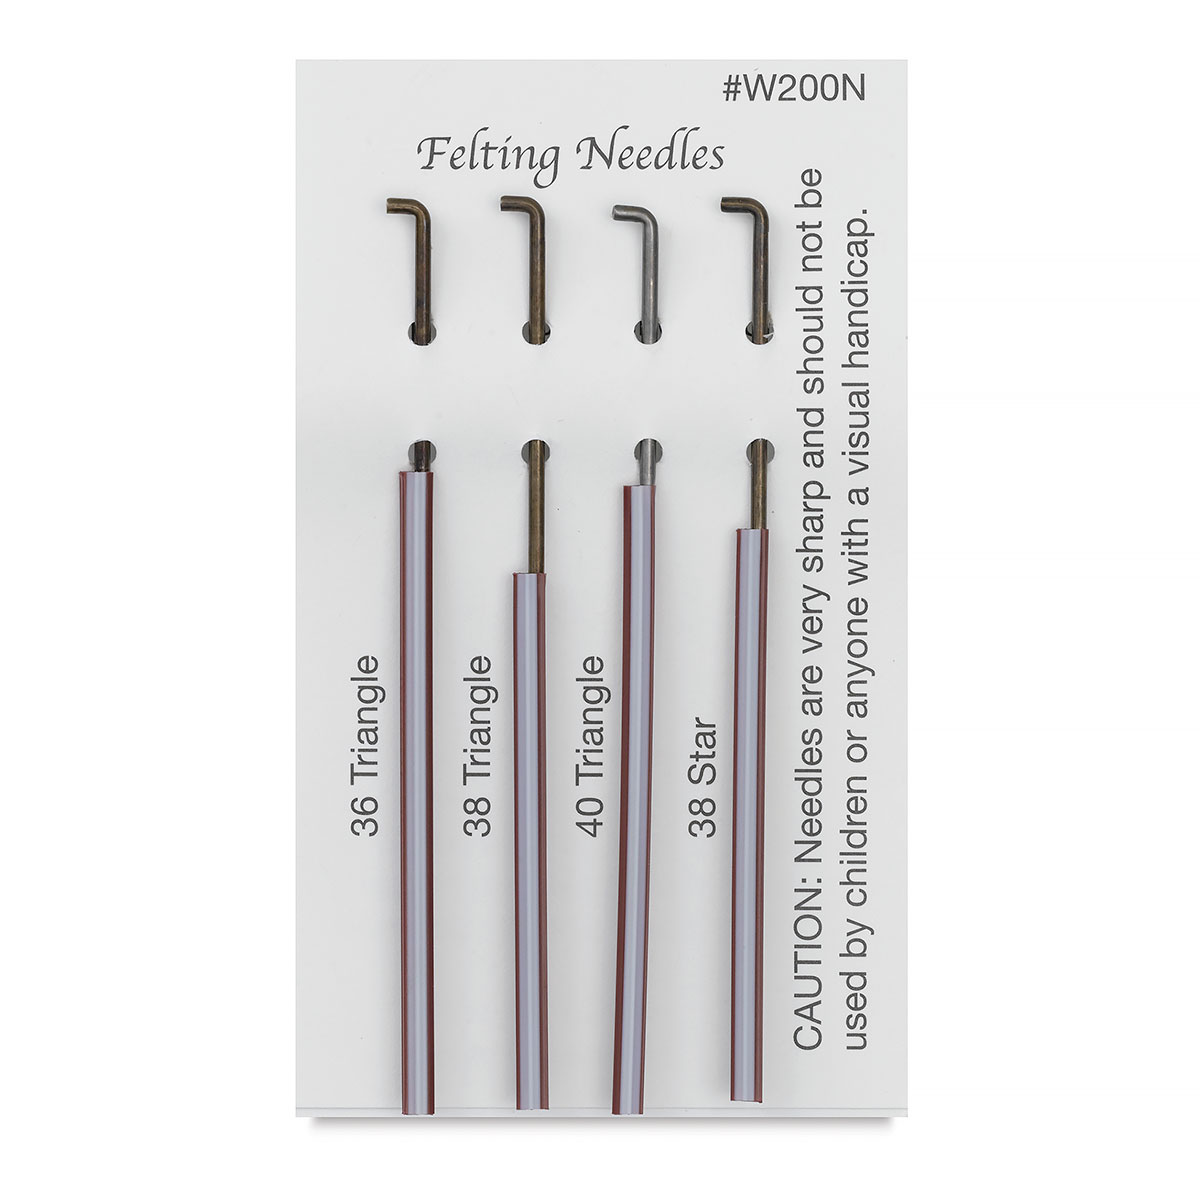 Triangular Felting Needles Color Coded Wool Felting Needles Tool Kit with Needle Bottle 35Pcs Needle Felting Kit,Wool Felting Supplies with 4 Types Star Twisted Cone